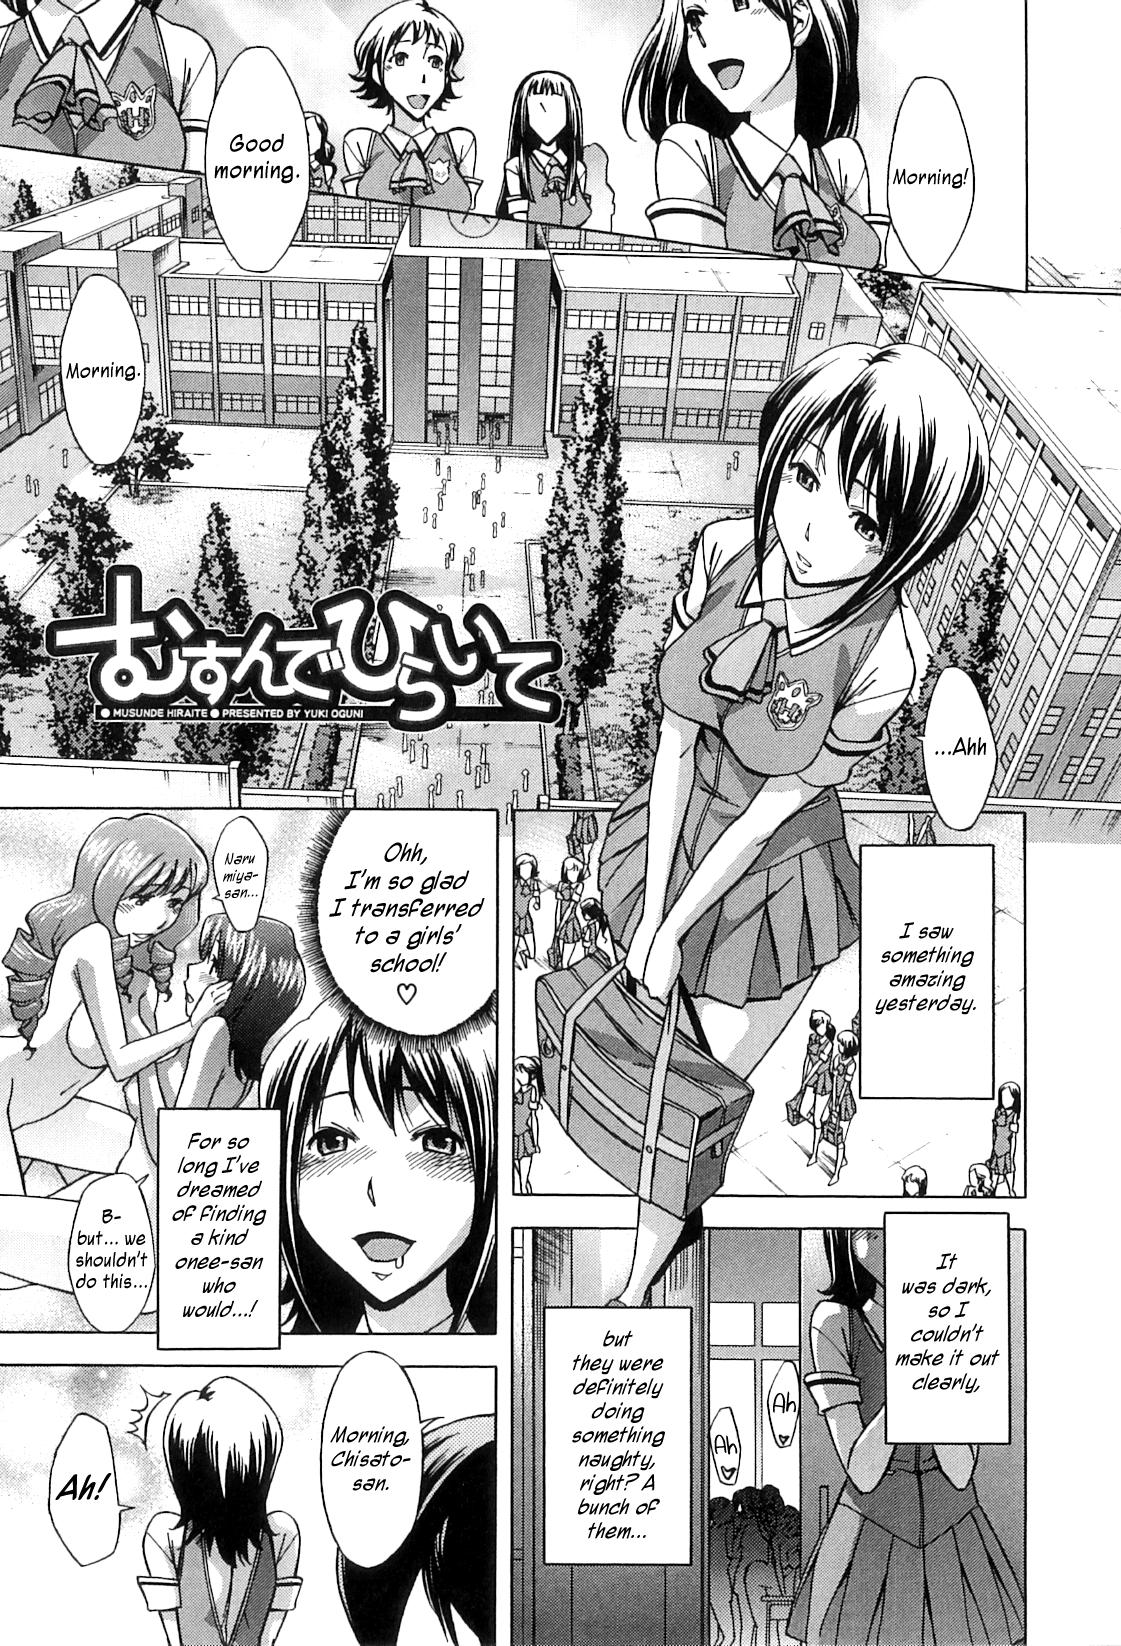 After School Tin Time chapter 1-4 12